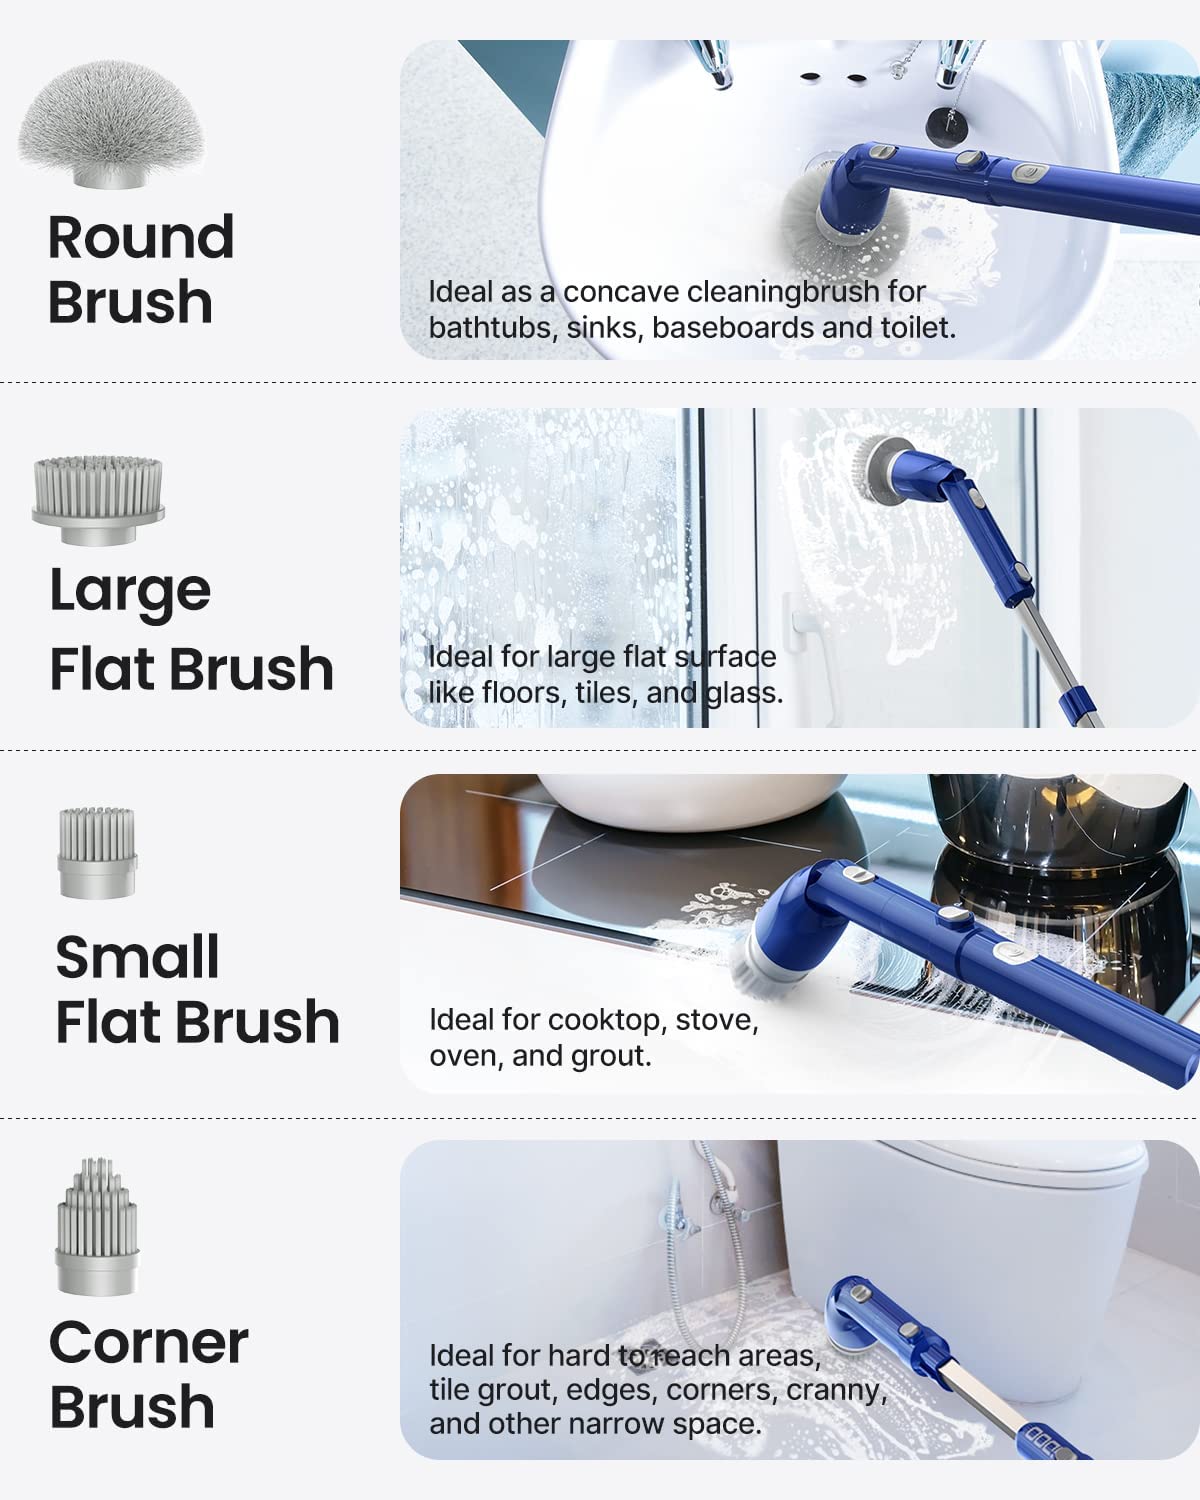 Cordless Cleaning Brush - _wf_cus Best Seller_CA by idoo